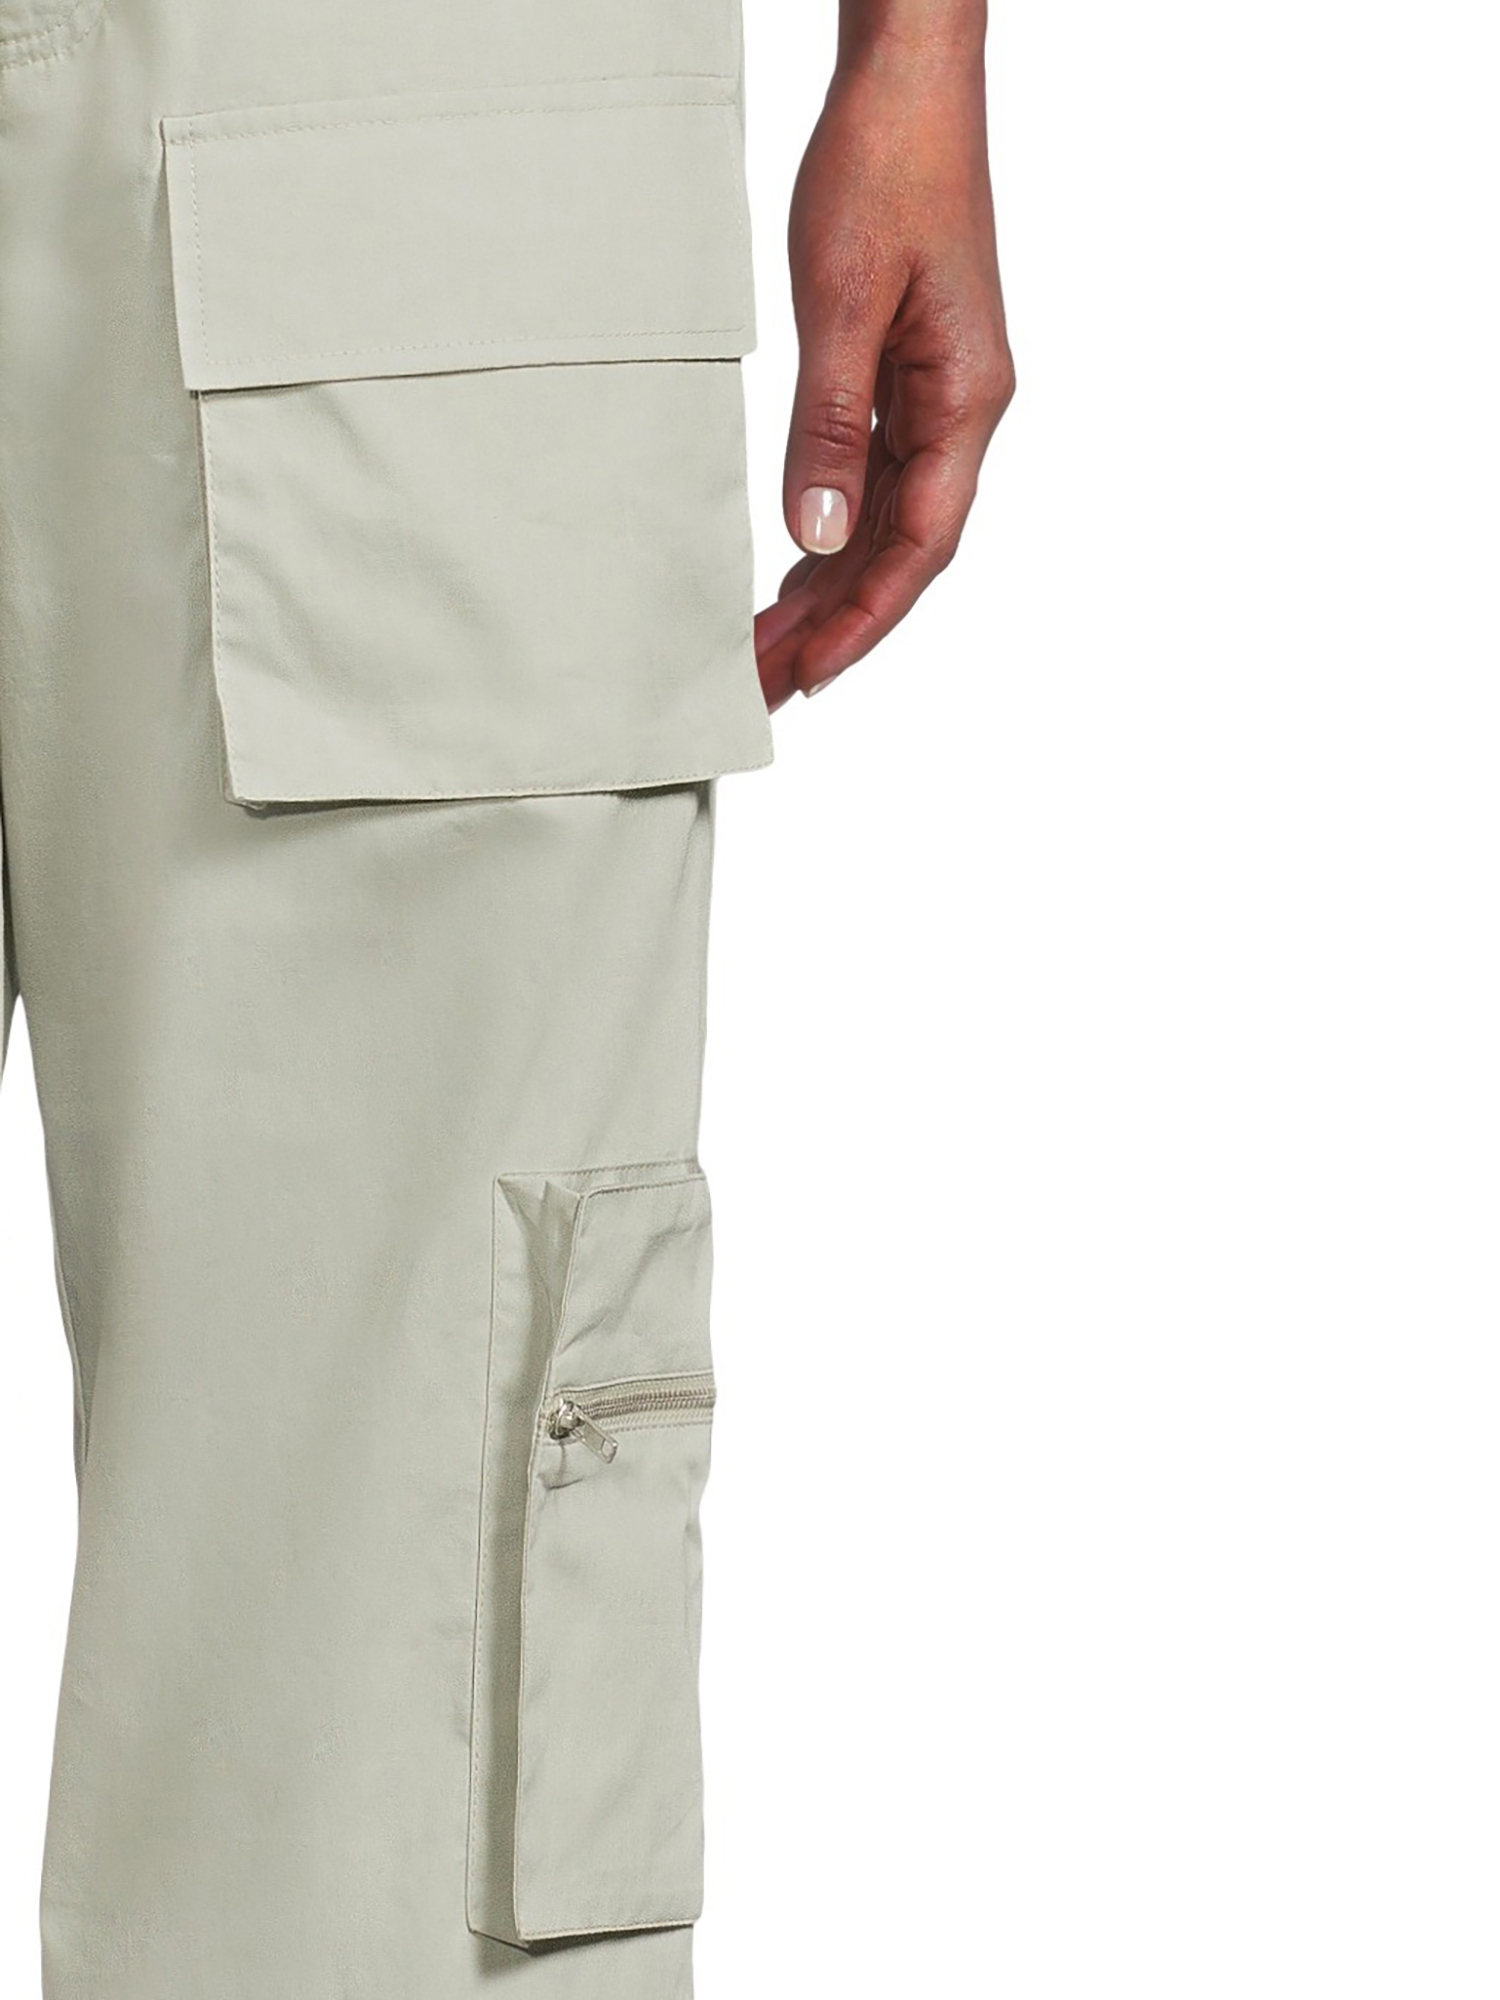 Liv & Lottie Juniors Cargo Pants with Zippers, Sizes S-XL - image 4 of 5